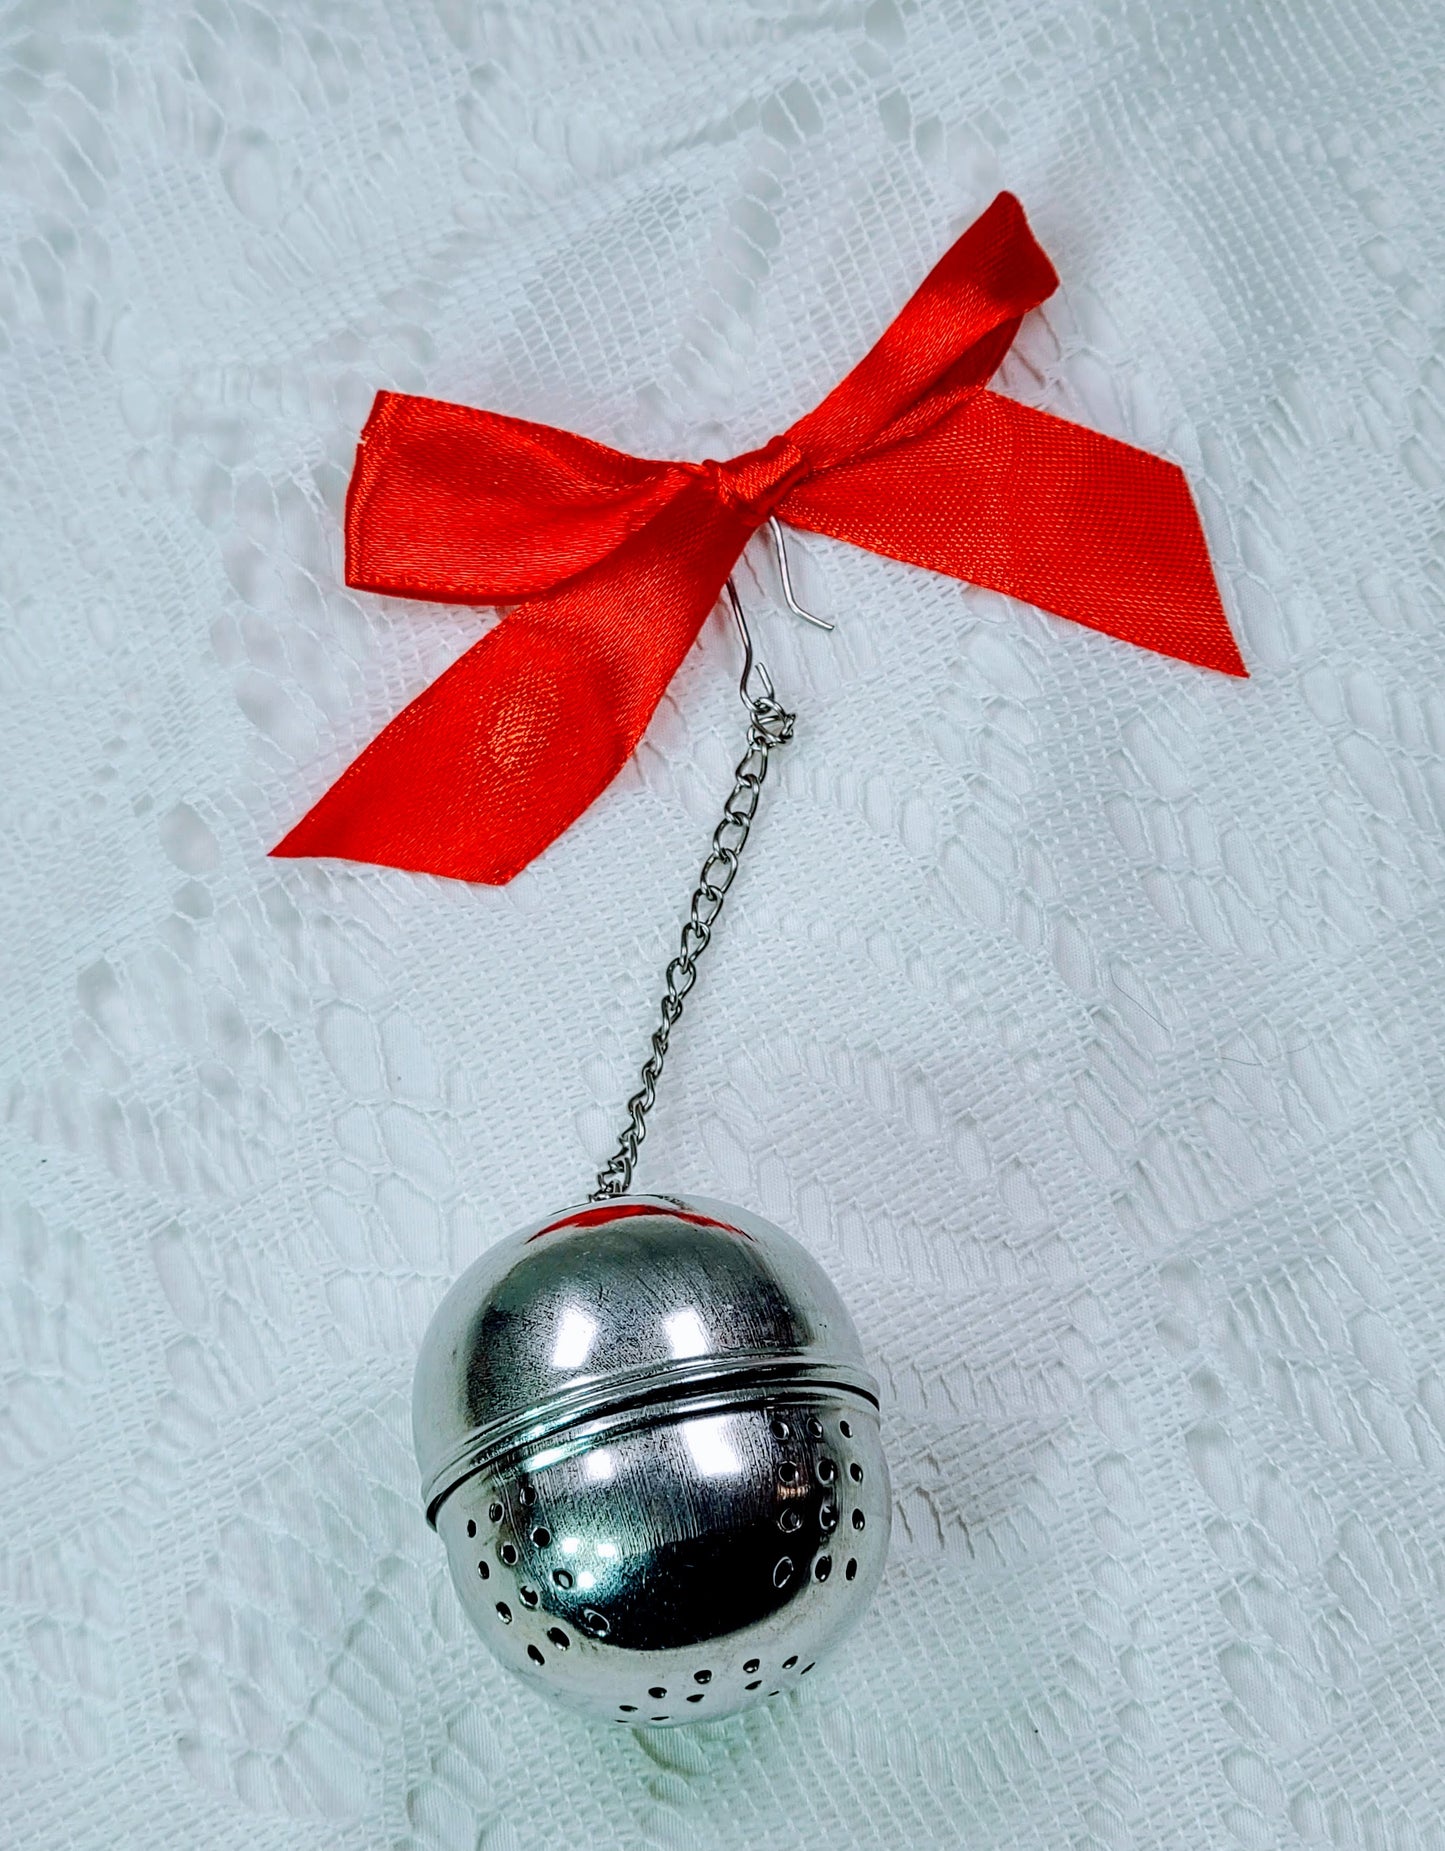 Loose Leaf Stainless Steel TEA BALL Infuser ~ Also Used for Herbal Spice Infusions ~ Chain and Hook ~ Used for Seeping